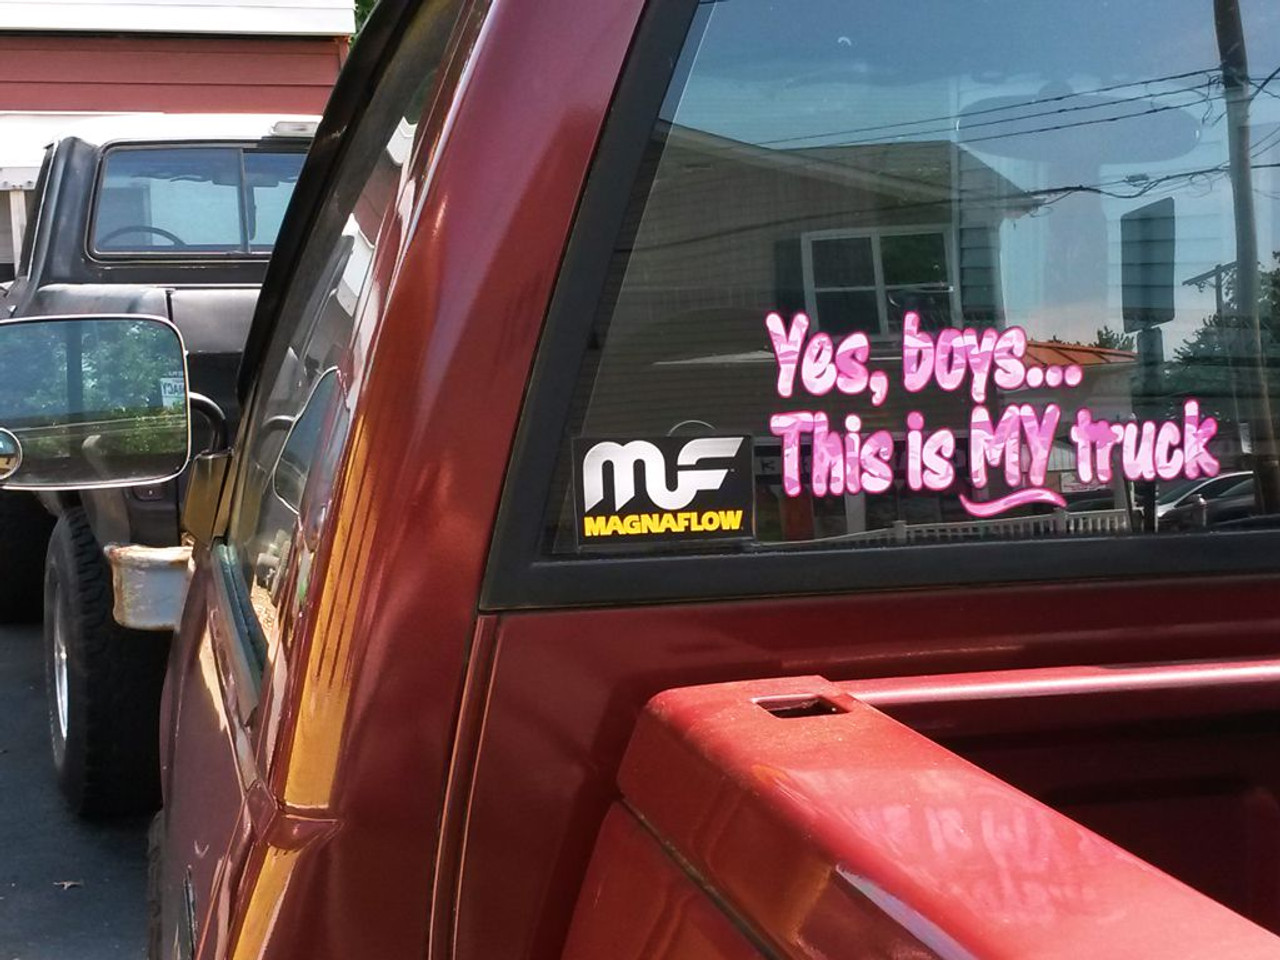 Yes boys...This is MY truck - Pink Camo - window decal